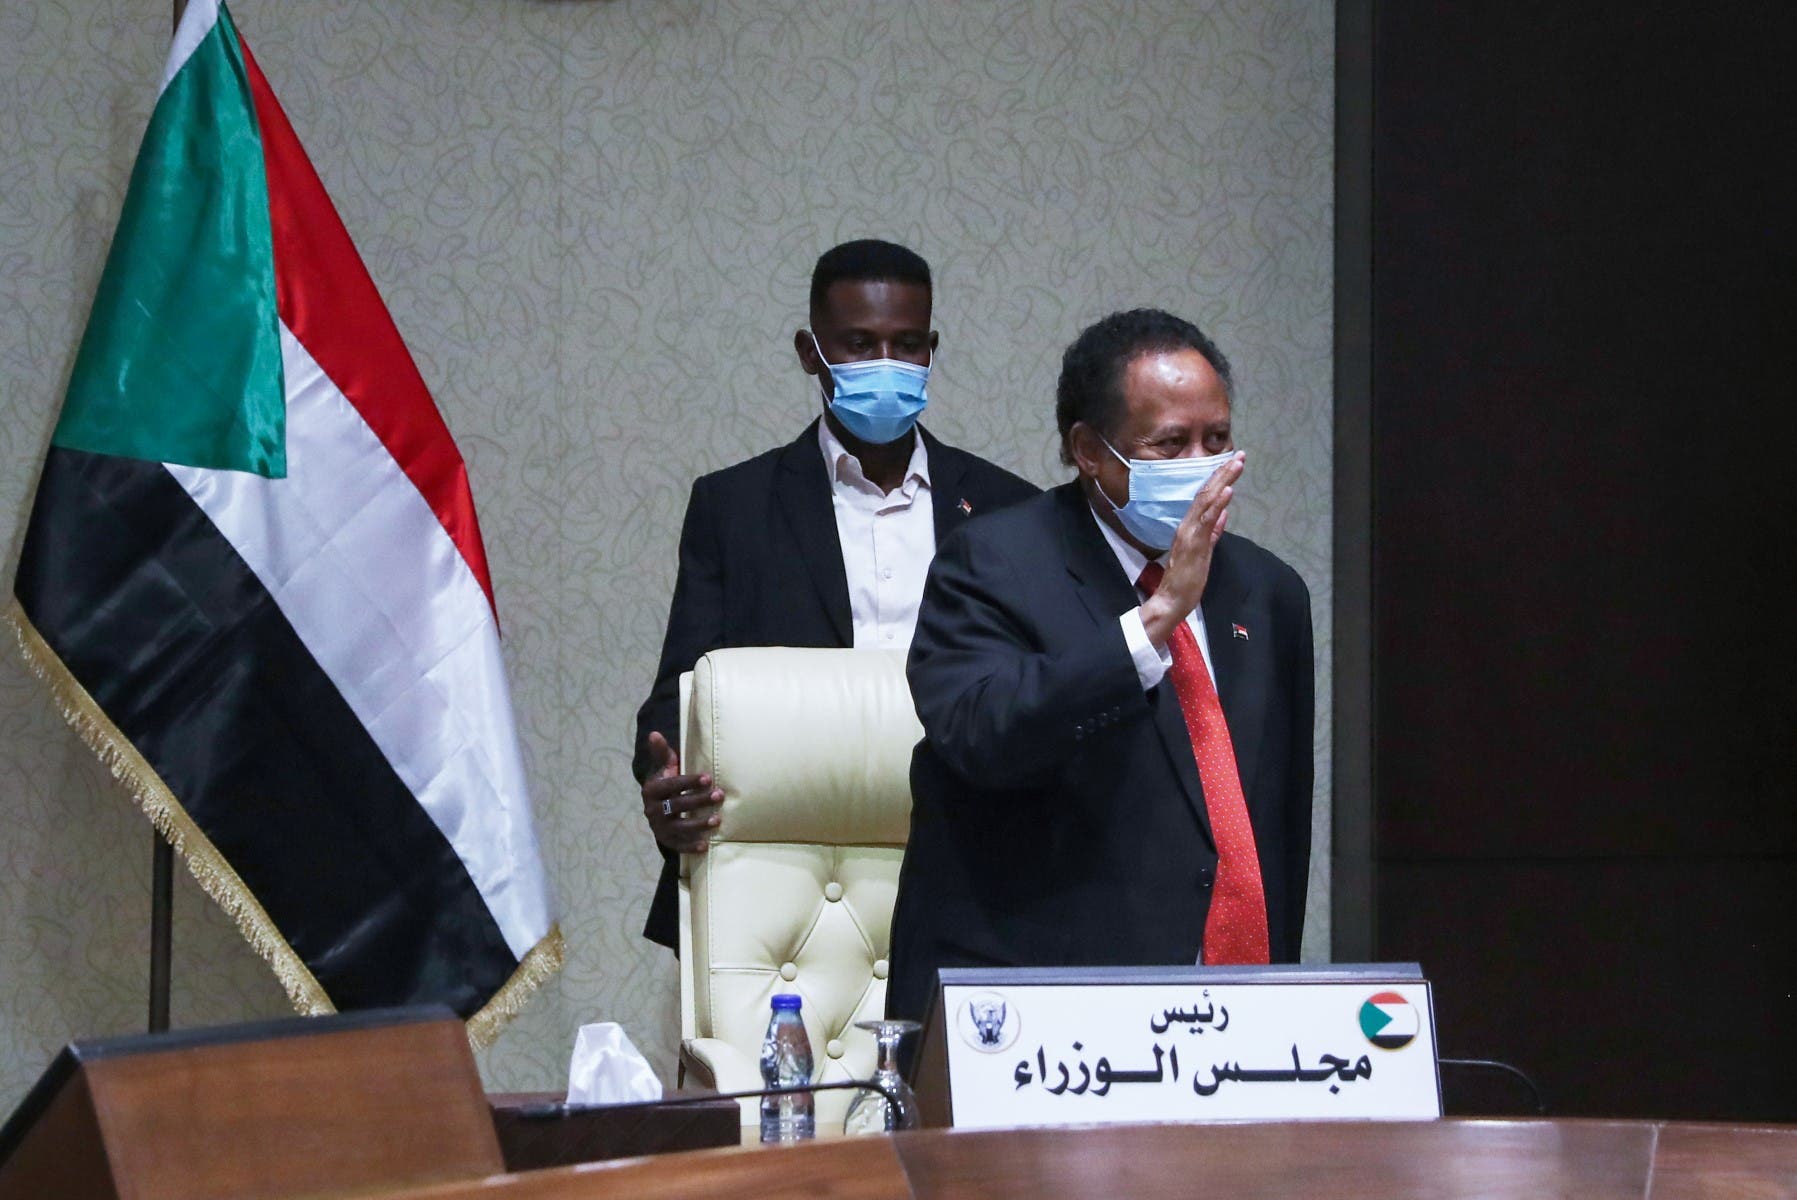 Britain is saddened by Hamdok’s resignation … and international support for the Sudanese